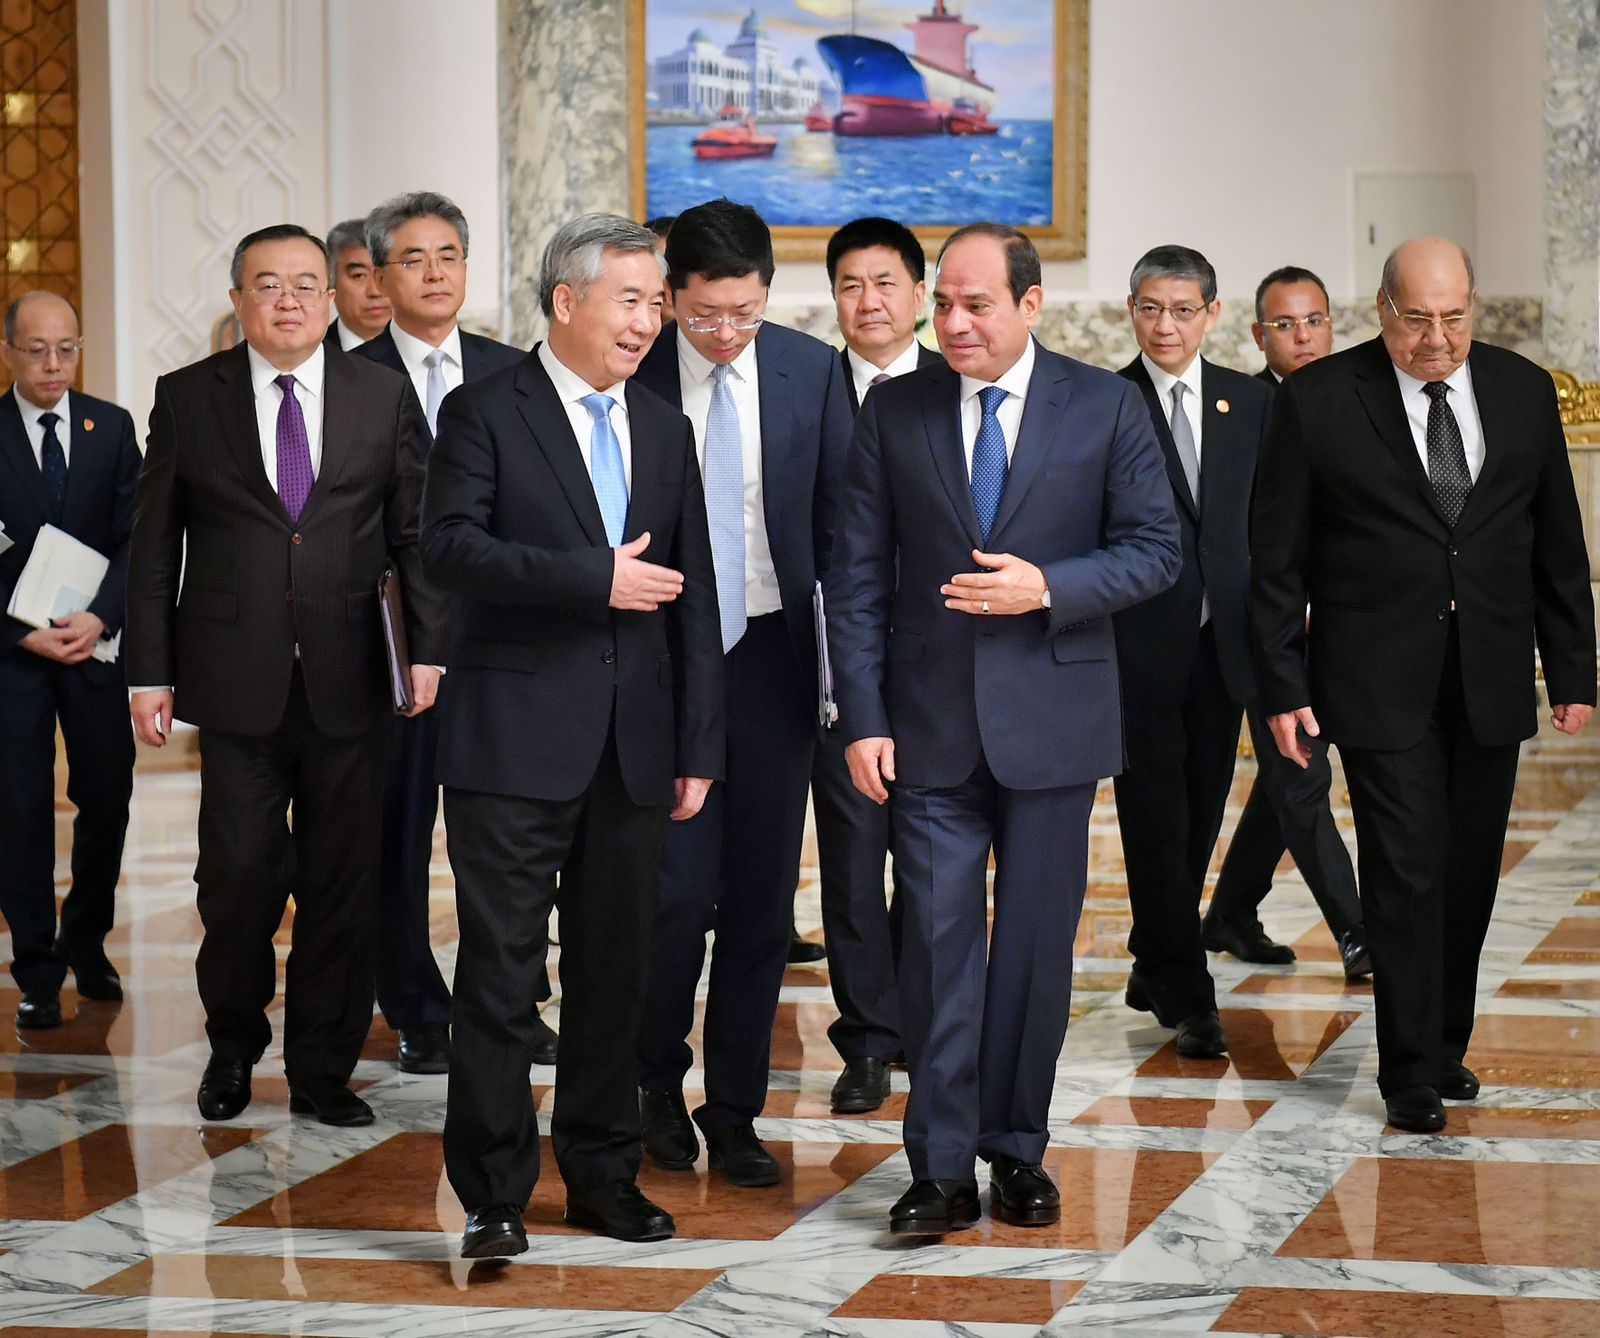 A high-level Chinese delegation